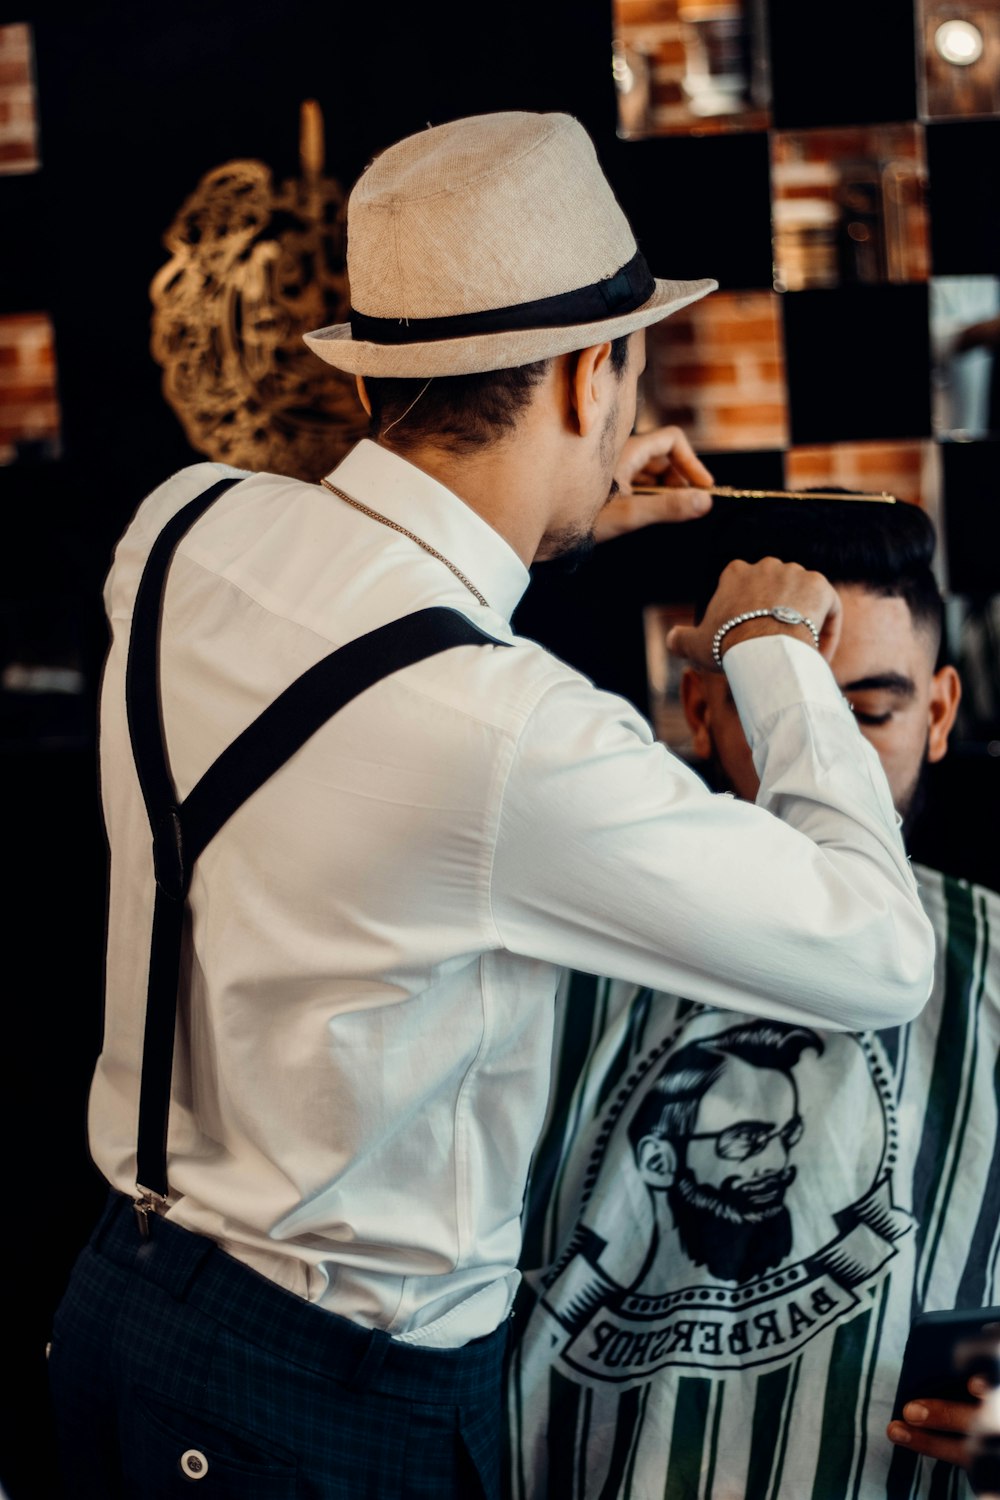 a man with a hat and suspenders is brushing his teeth